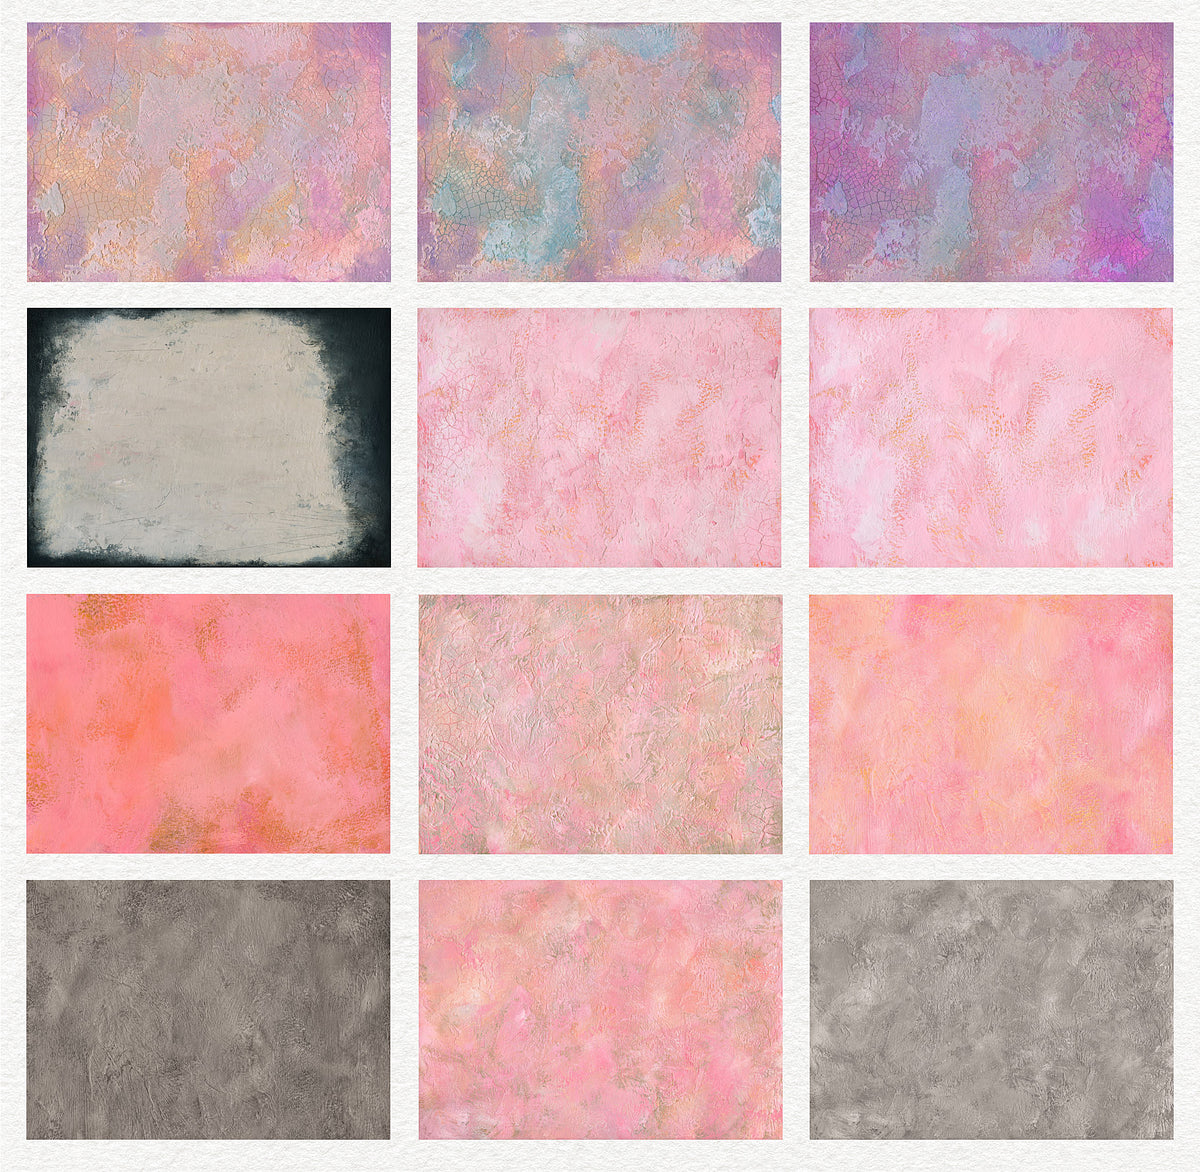 Atelier hand-painted texture collection. Extra-large, extended commercial license.